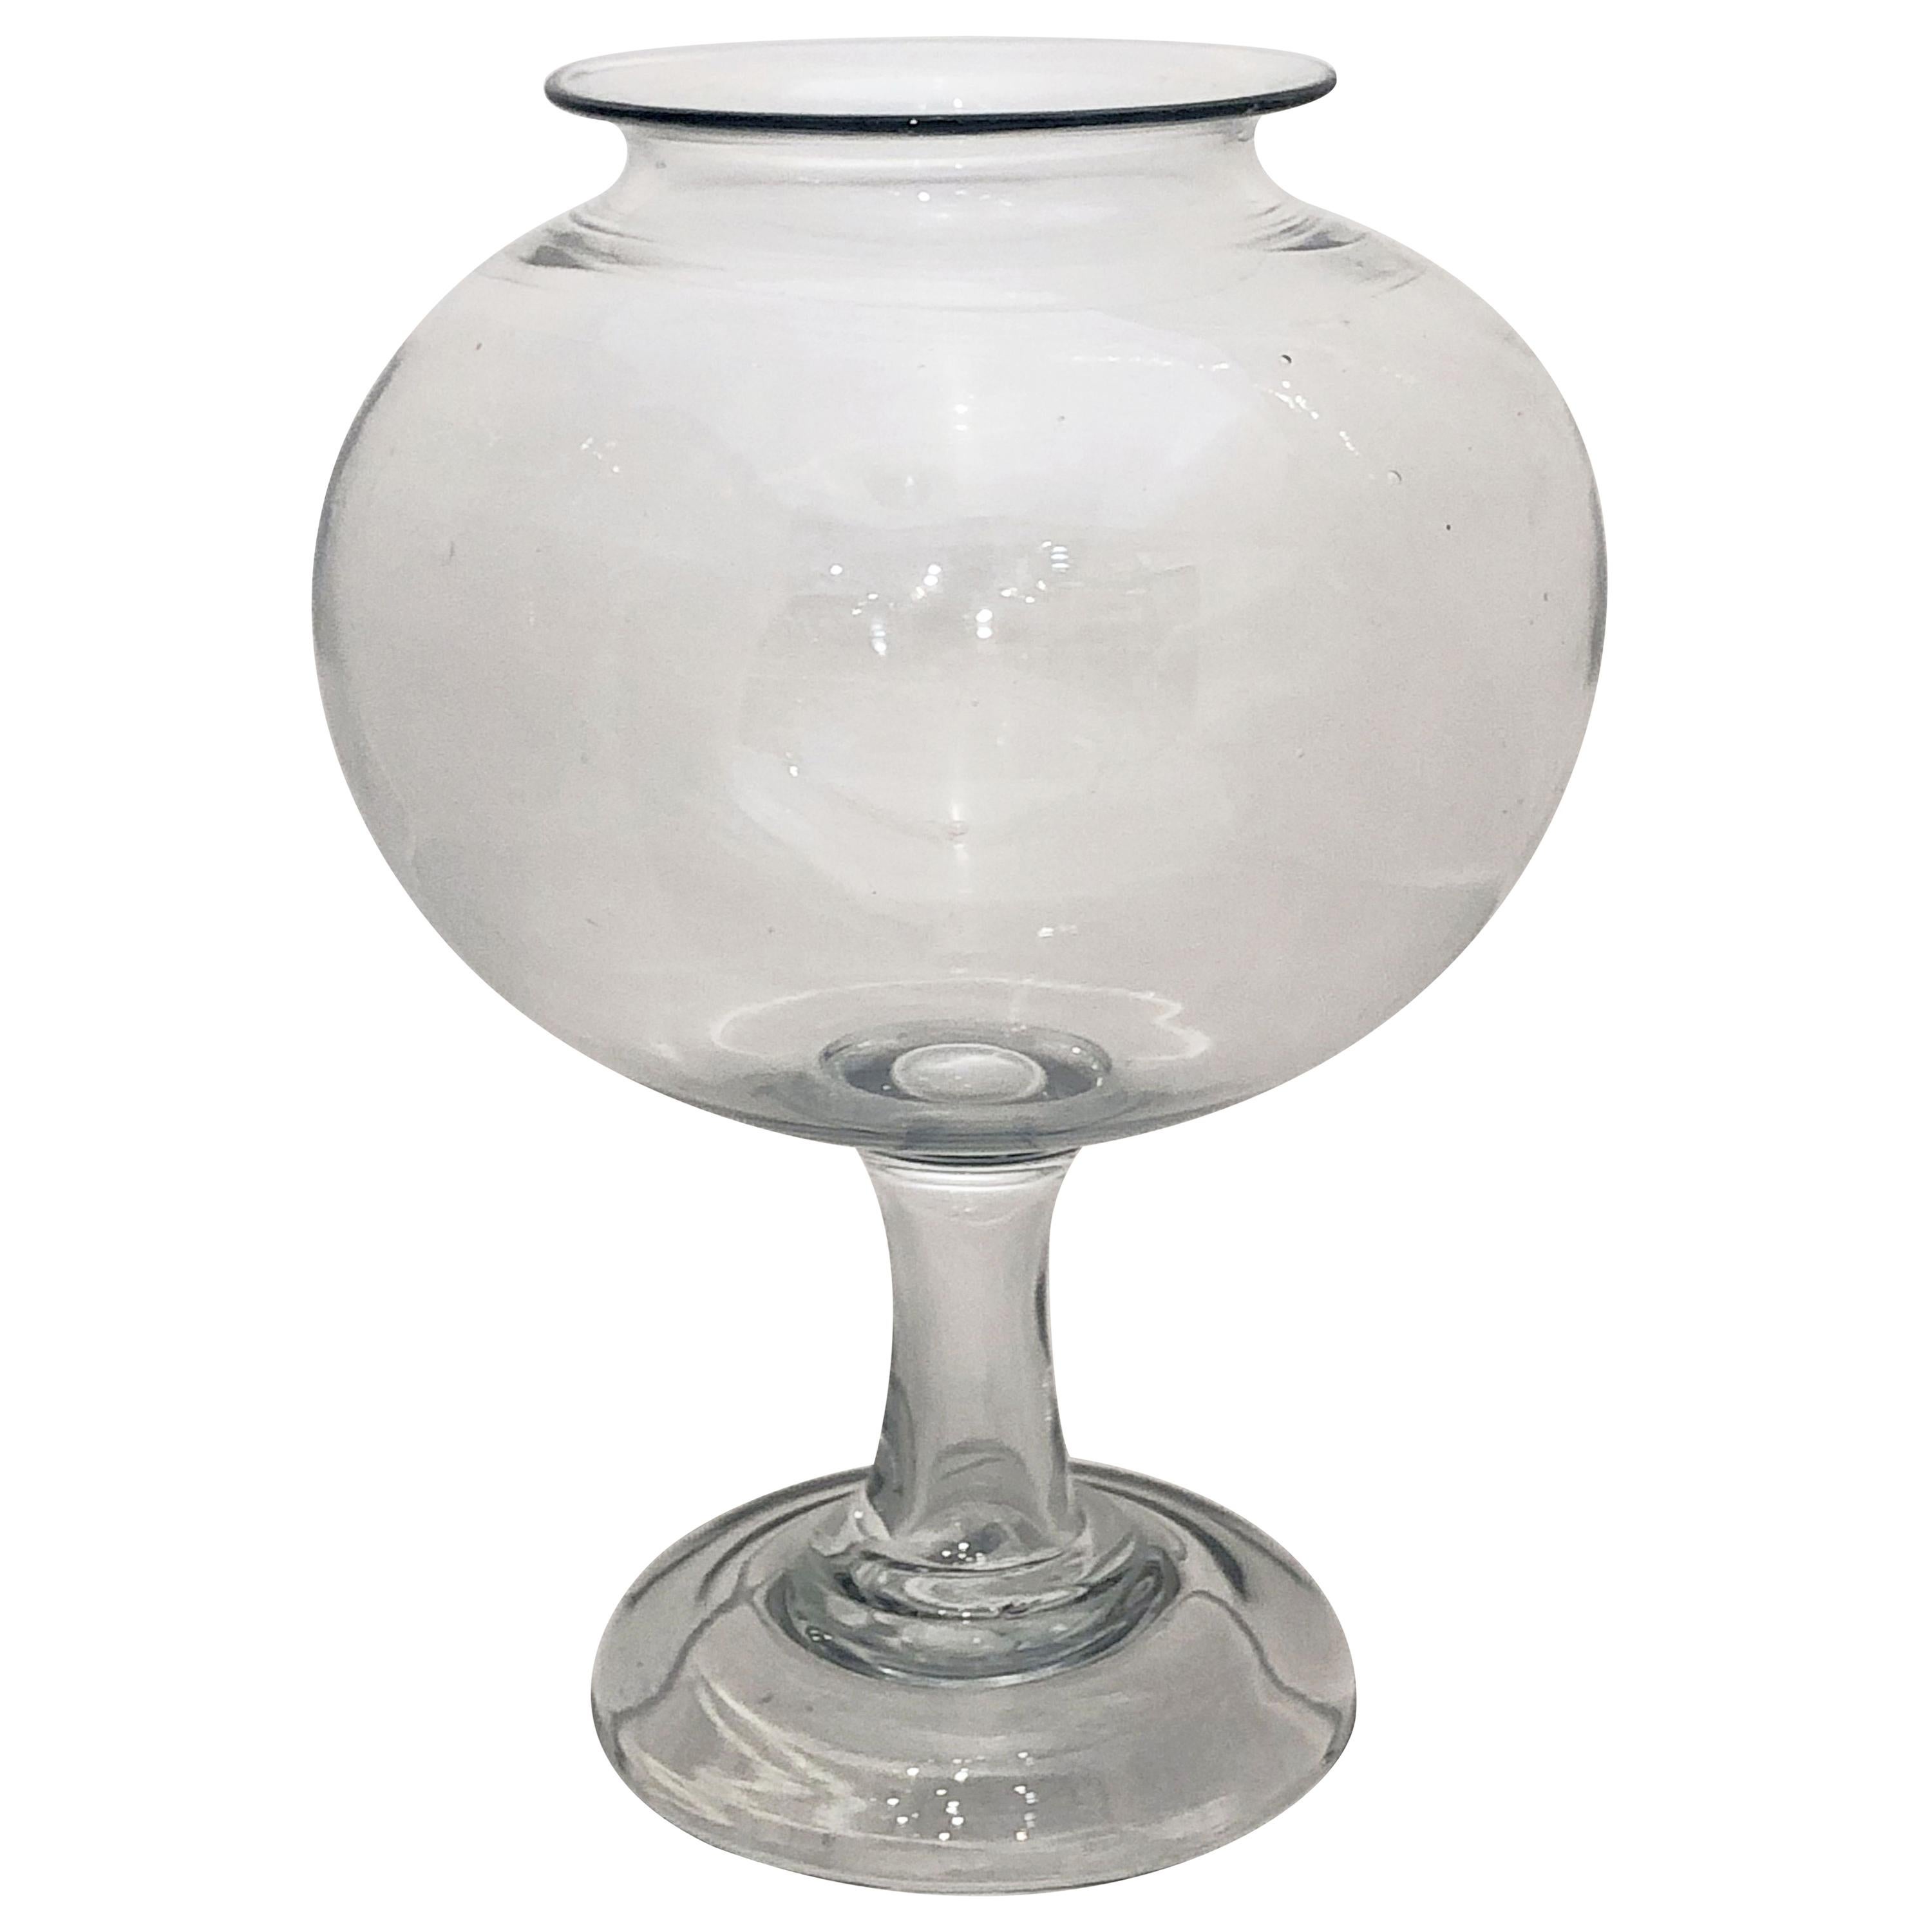 French Footed Leeches Jar of Glass from the 19th Century, a Medical Rarity